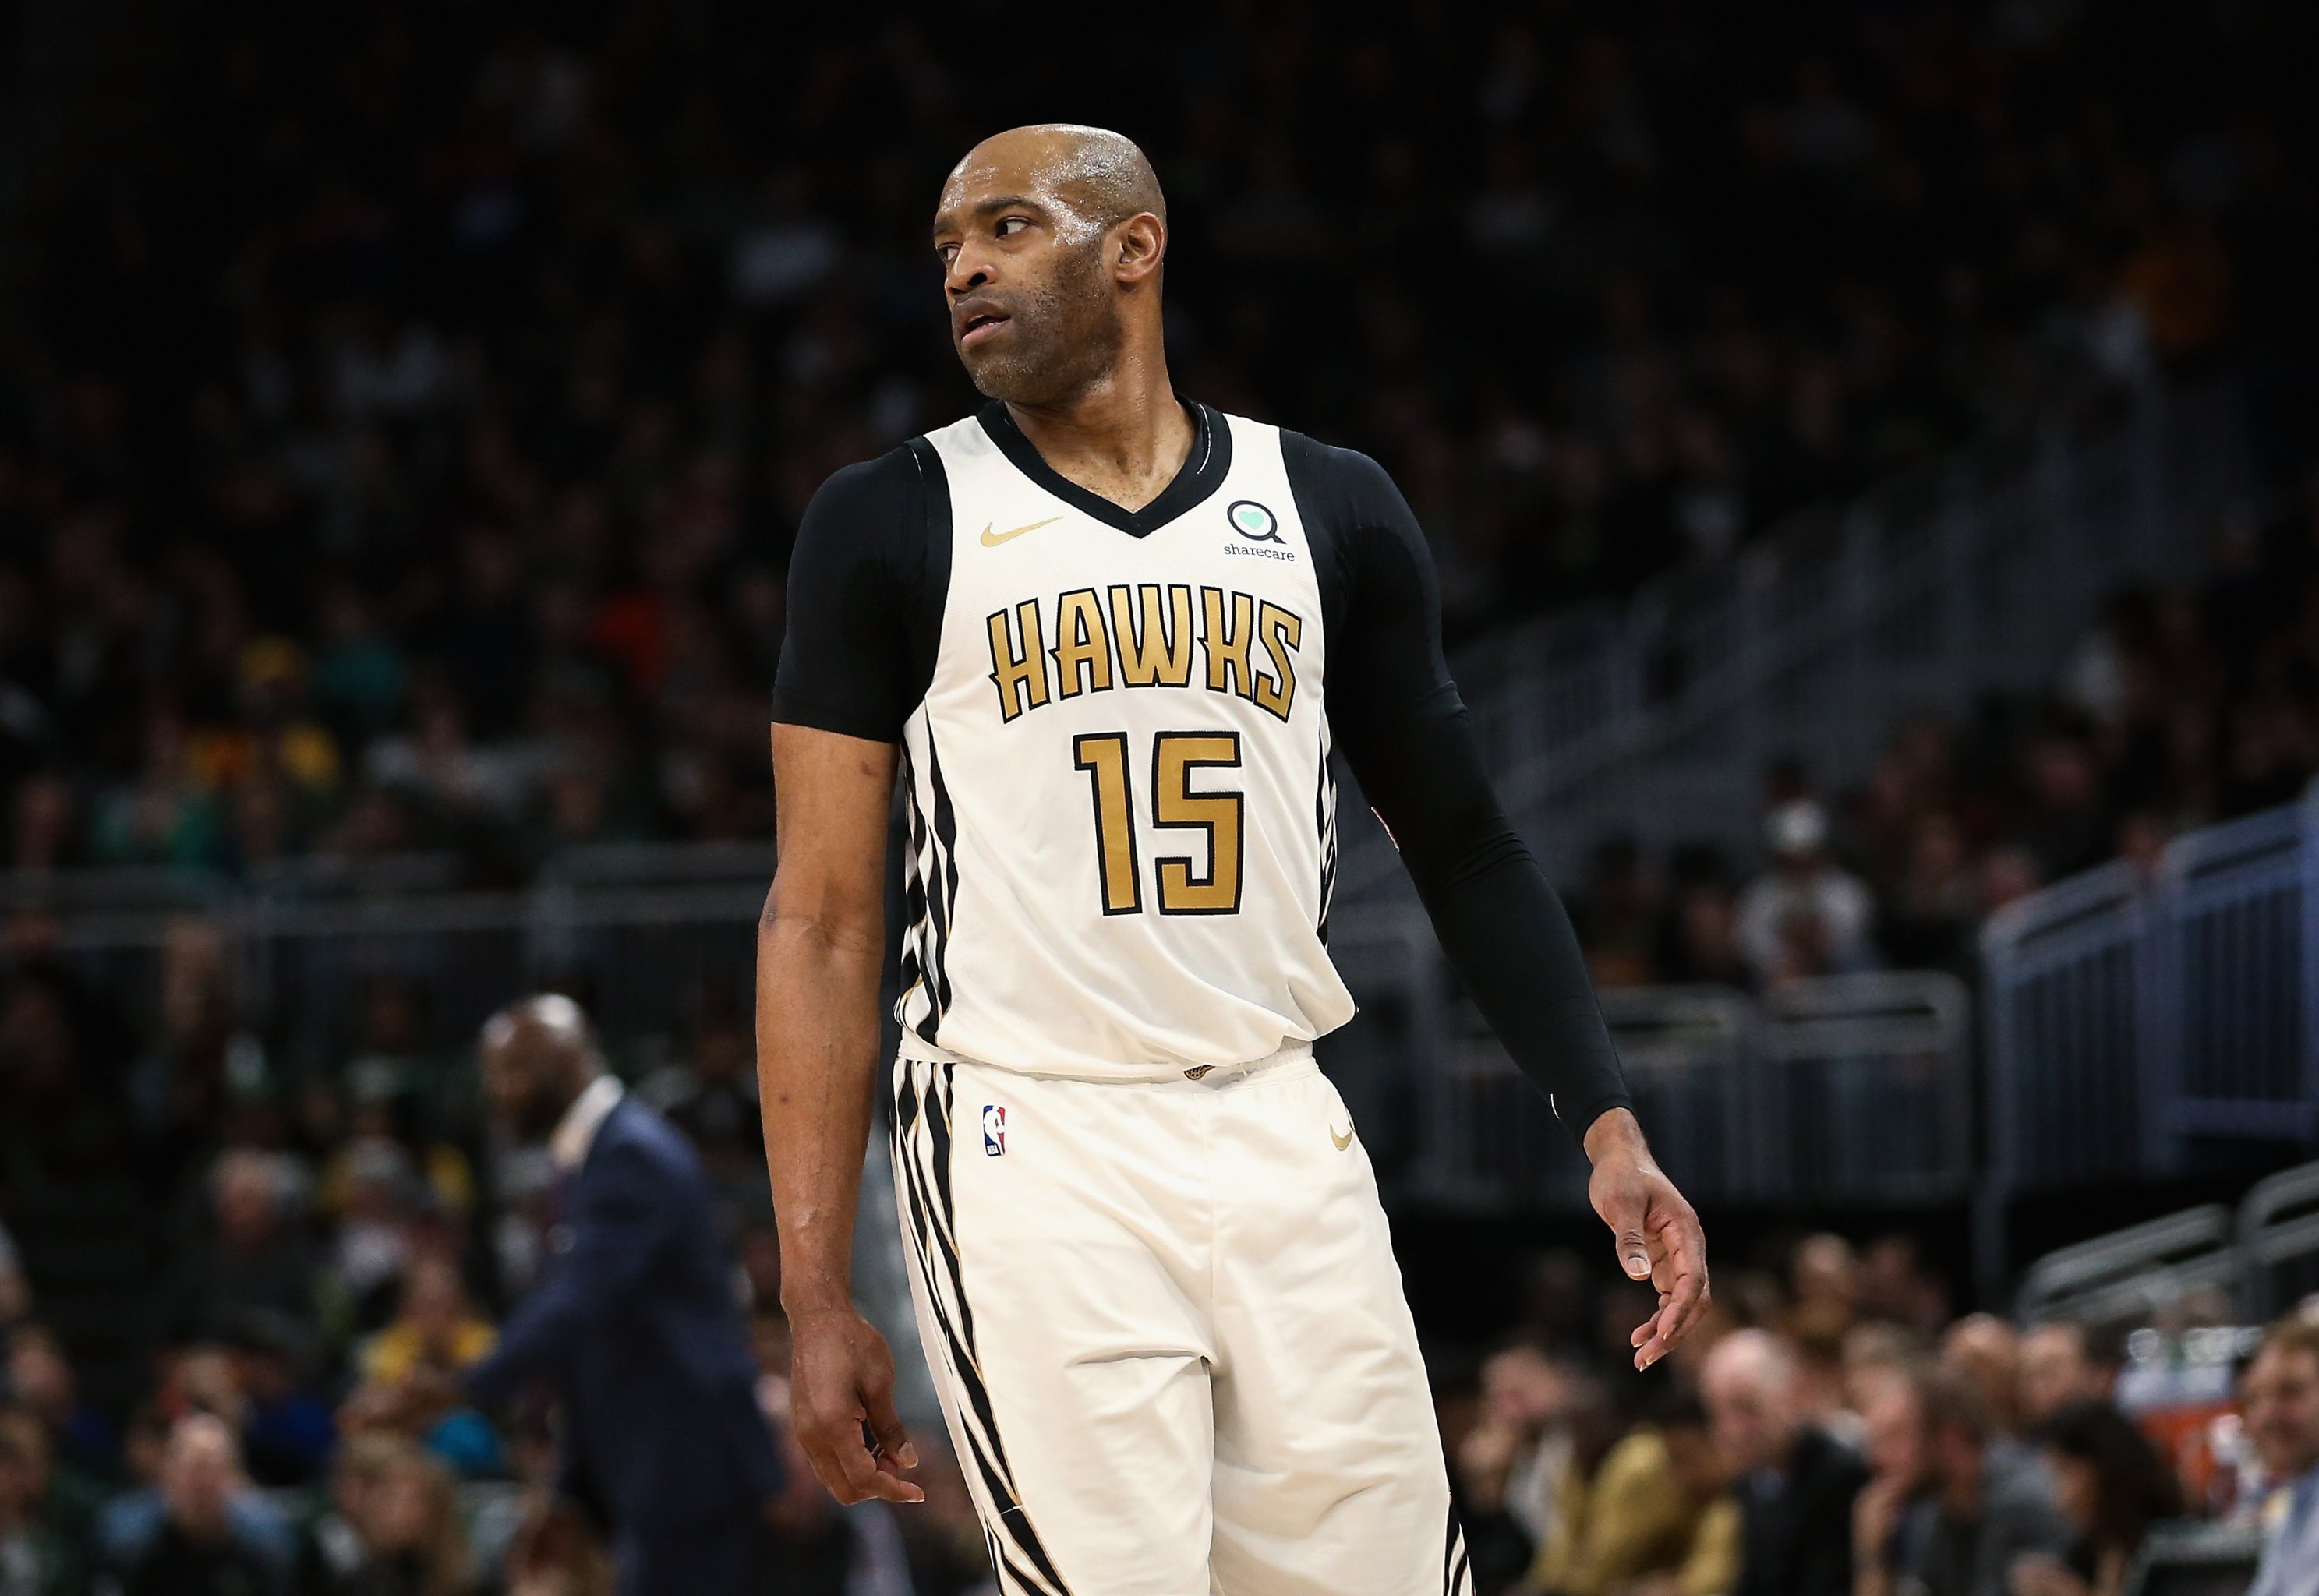 What To Expect From Vince Carter As He Eyes A 22nd NBA Season